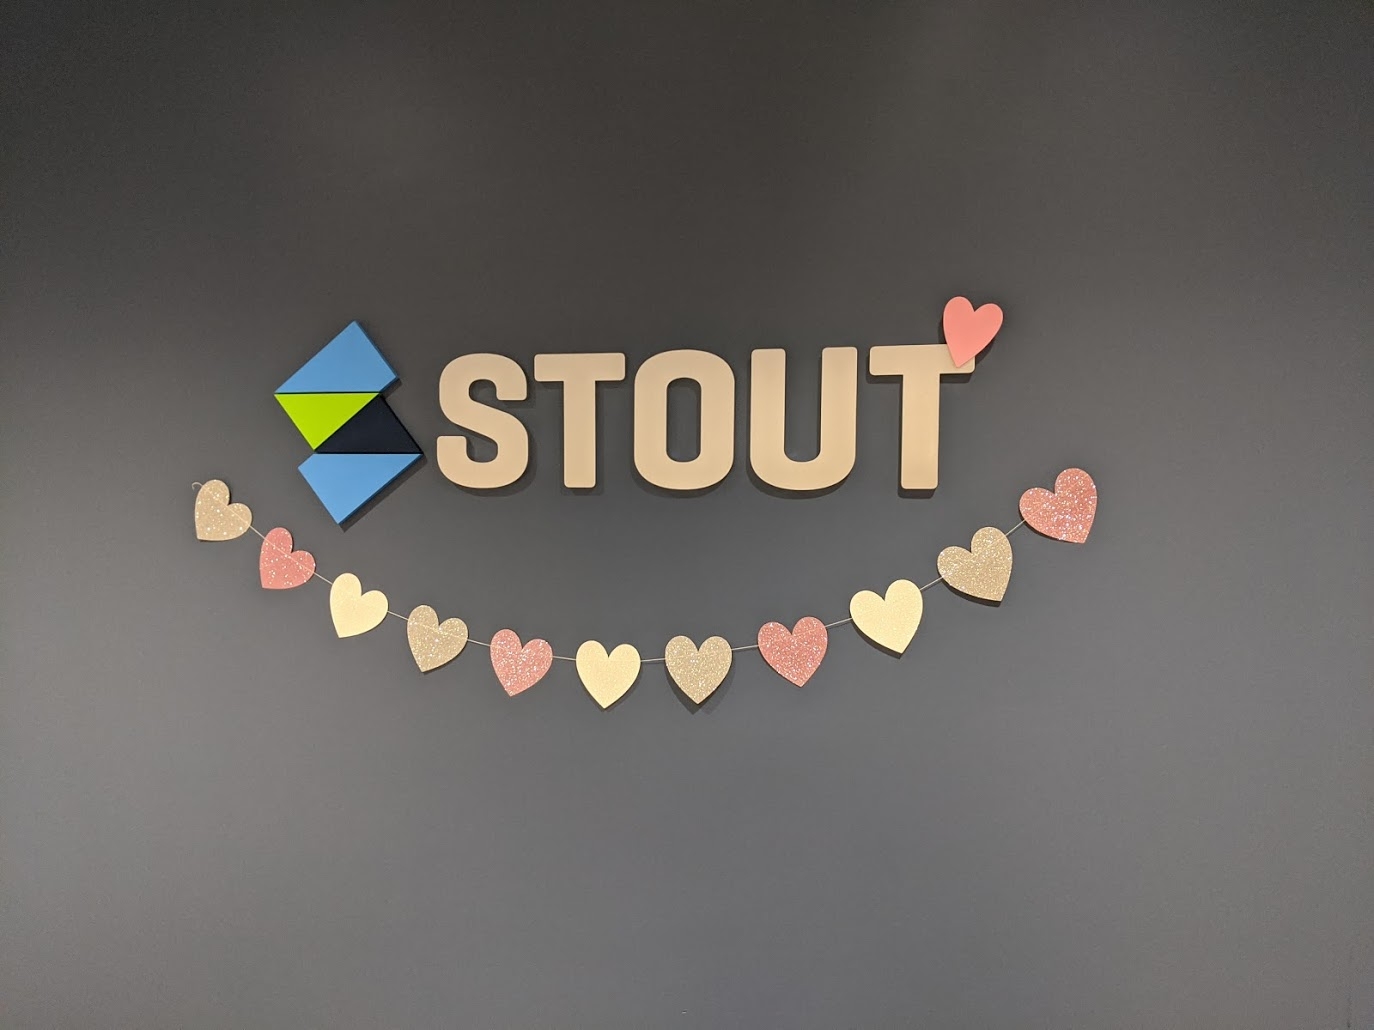 Stout logo with hearts for Valentines celebration.